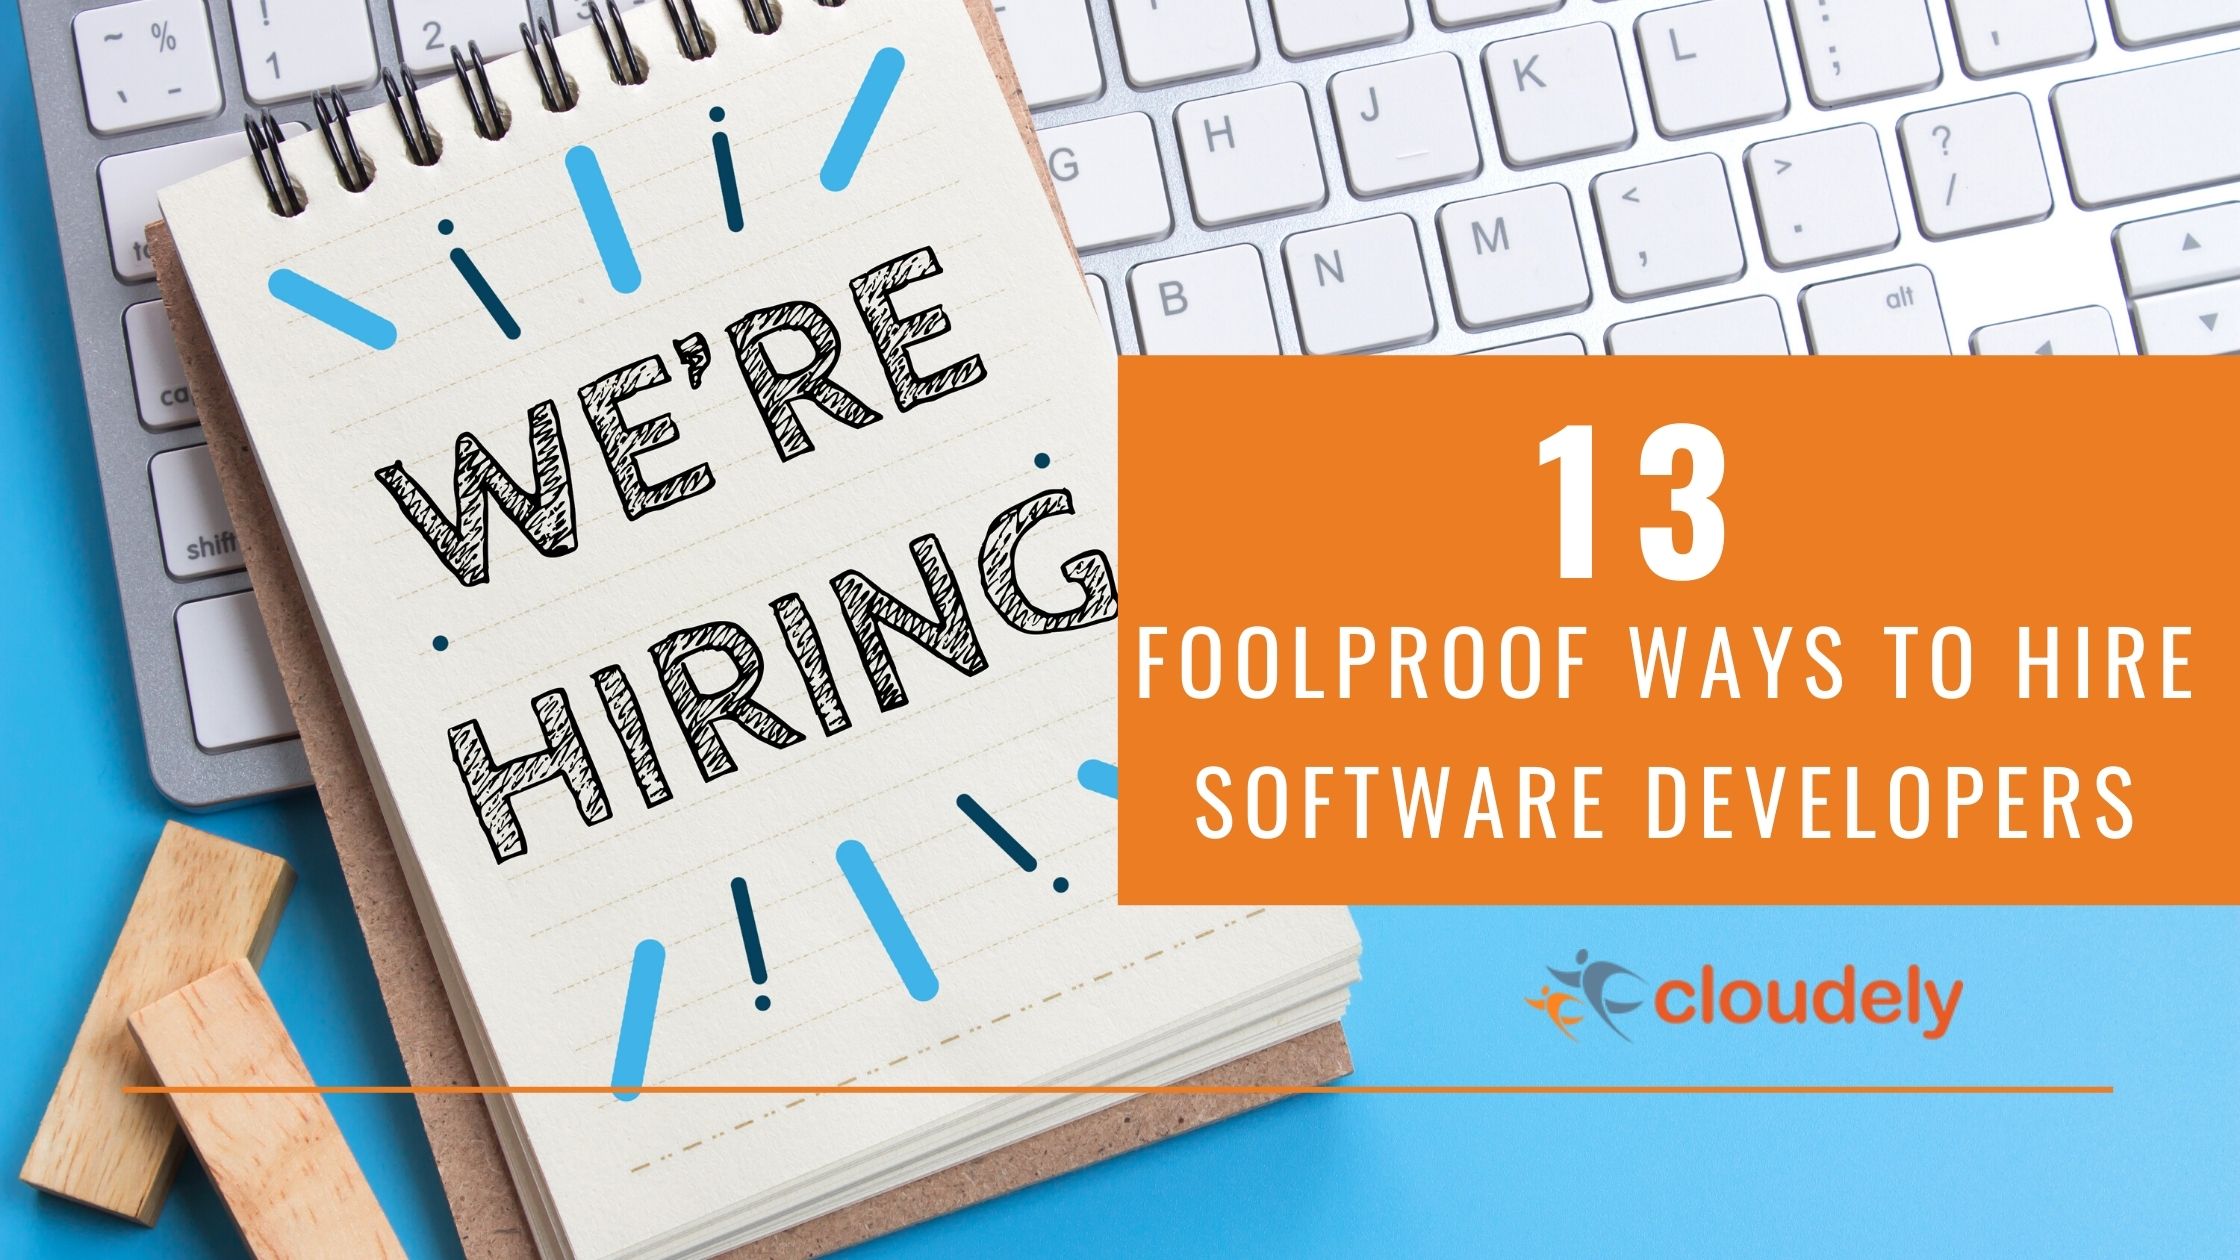 Foolproof ways to hire software developers